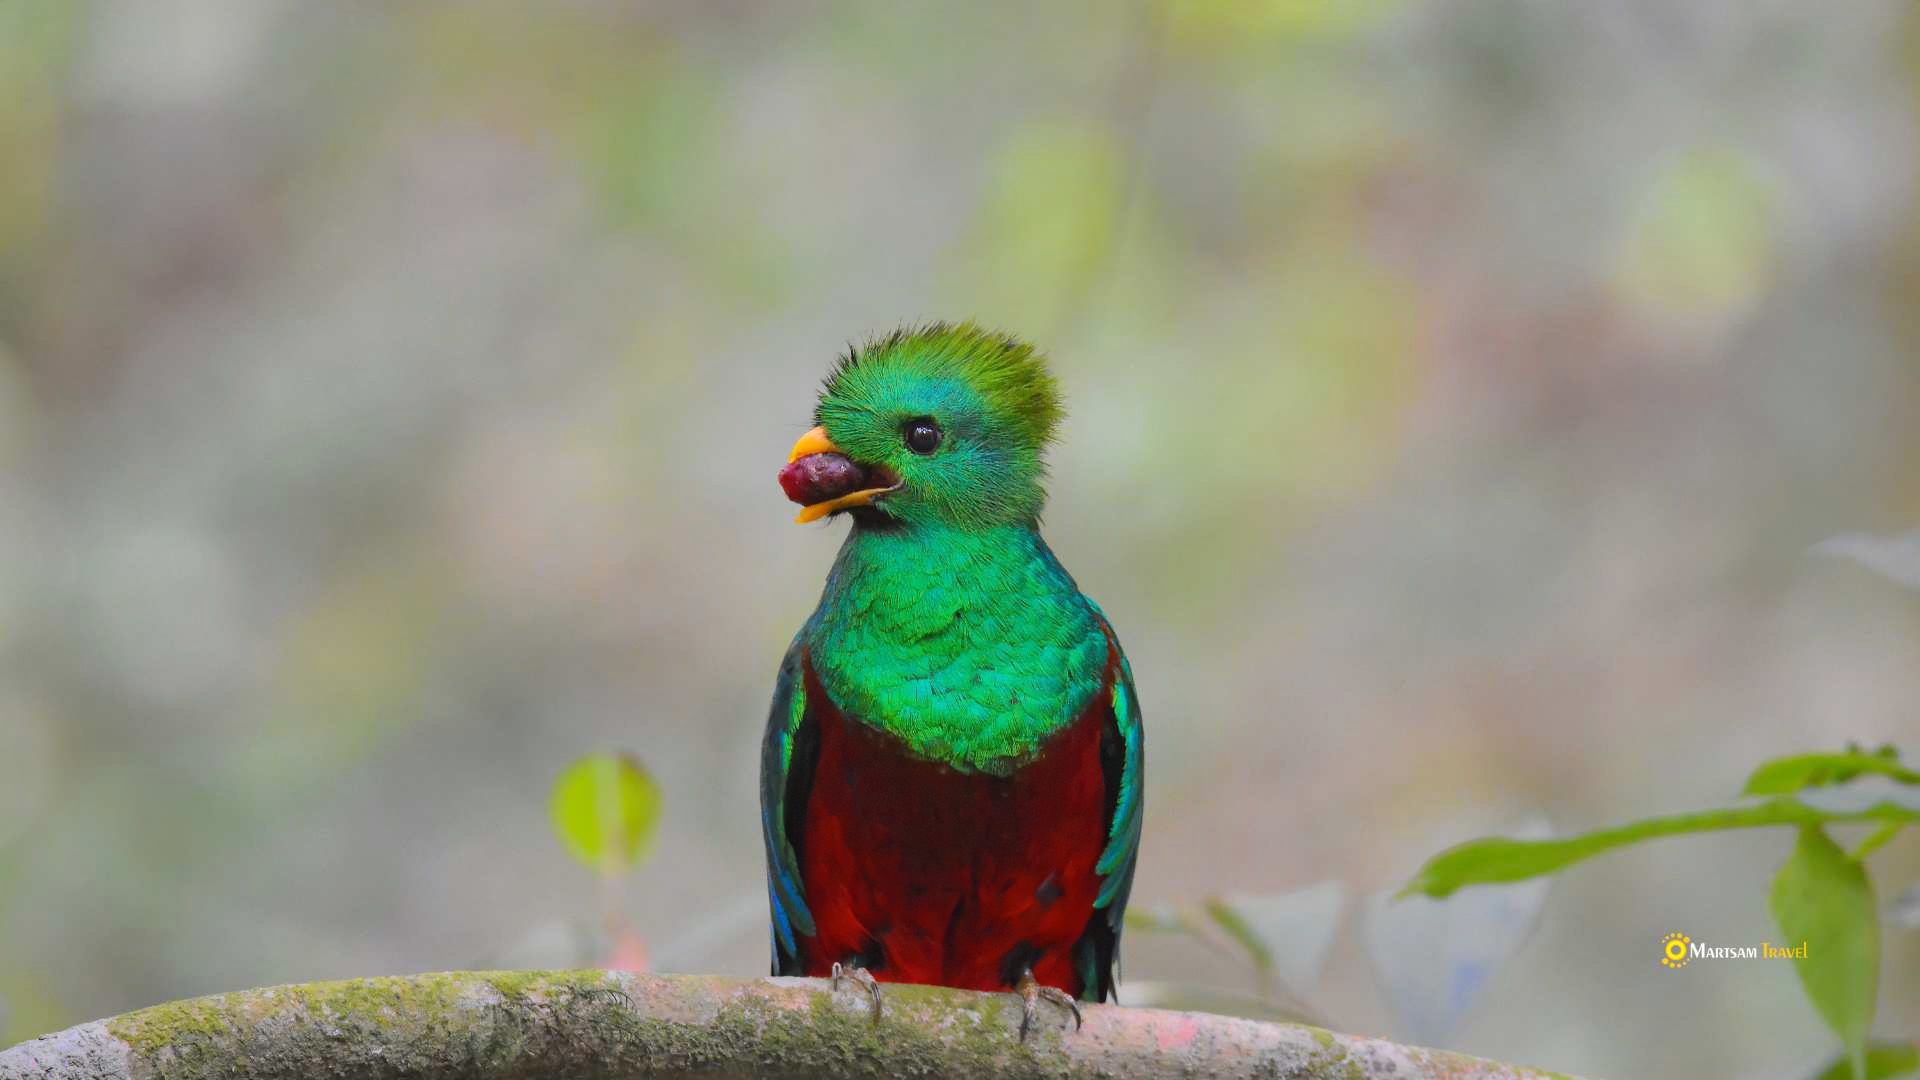 Resplendent Quetzal majestically perched during our Guatemala Nature Retreat nature hike.